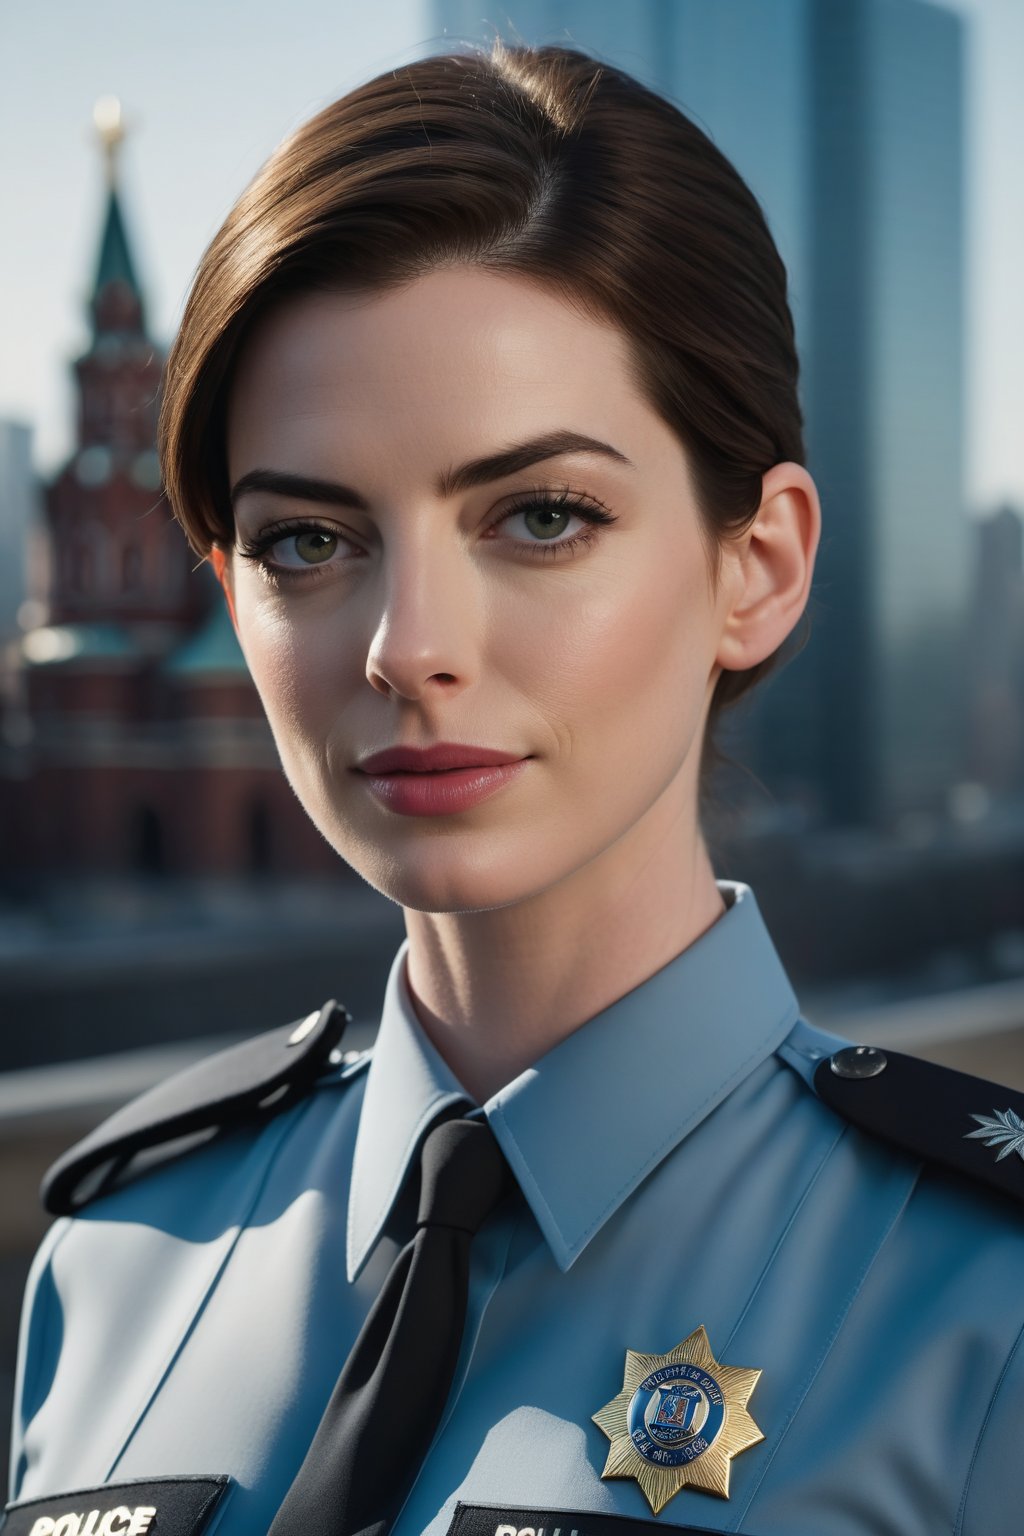 Anne Hathaway as a Russian female police officer poses confidently in front of a subtle cityscape backdrop. Soft, sharp light wraps around her face and body, accentuating the definition of her C-cup breasts and toned buttocks. Her eyes, perfectly symmetrical and expressive, seem to pierce through the lens. The Fujifilm XT3 captures every detail with high-quality, 8K HDR precision, rendering a cinematic scene with film grain texture, high contrast, and breathtaking beauty.